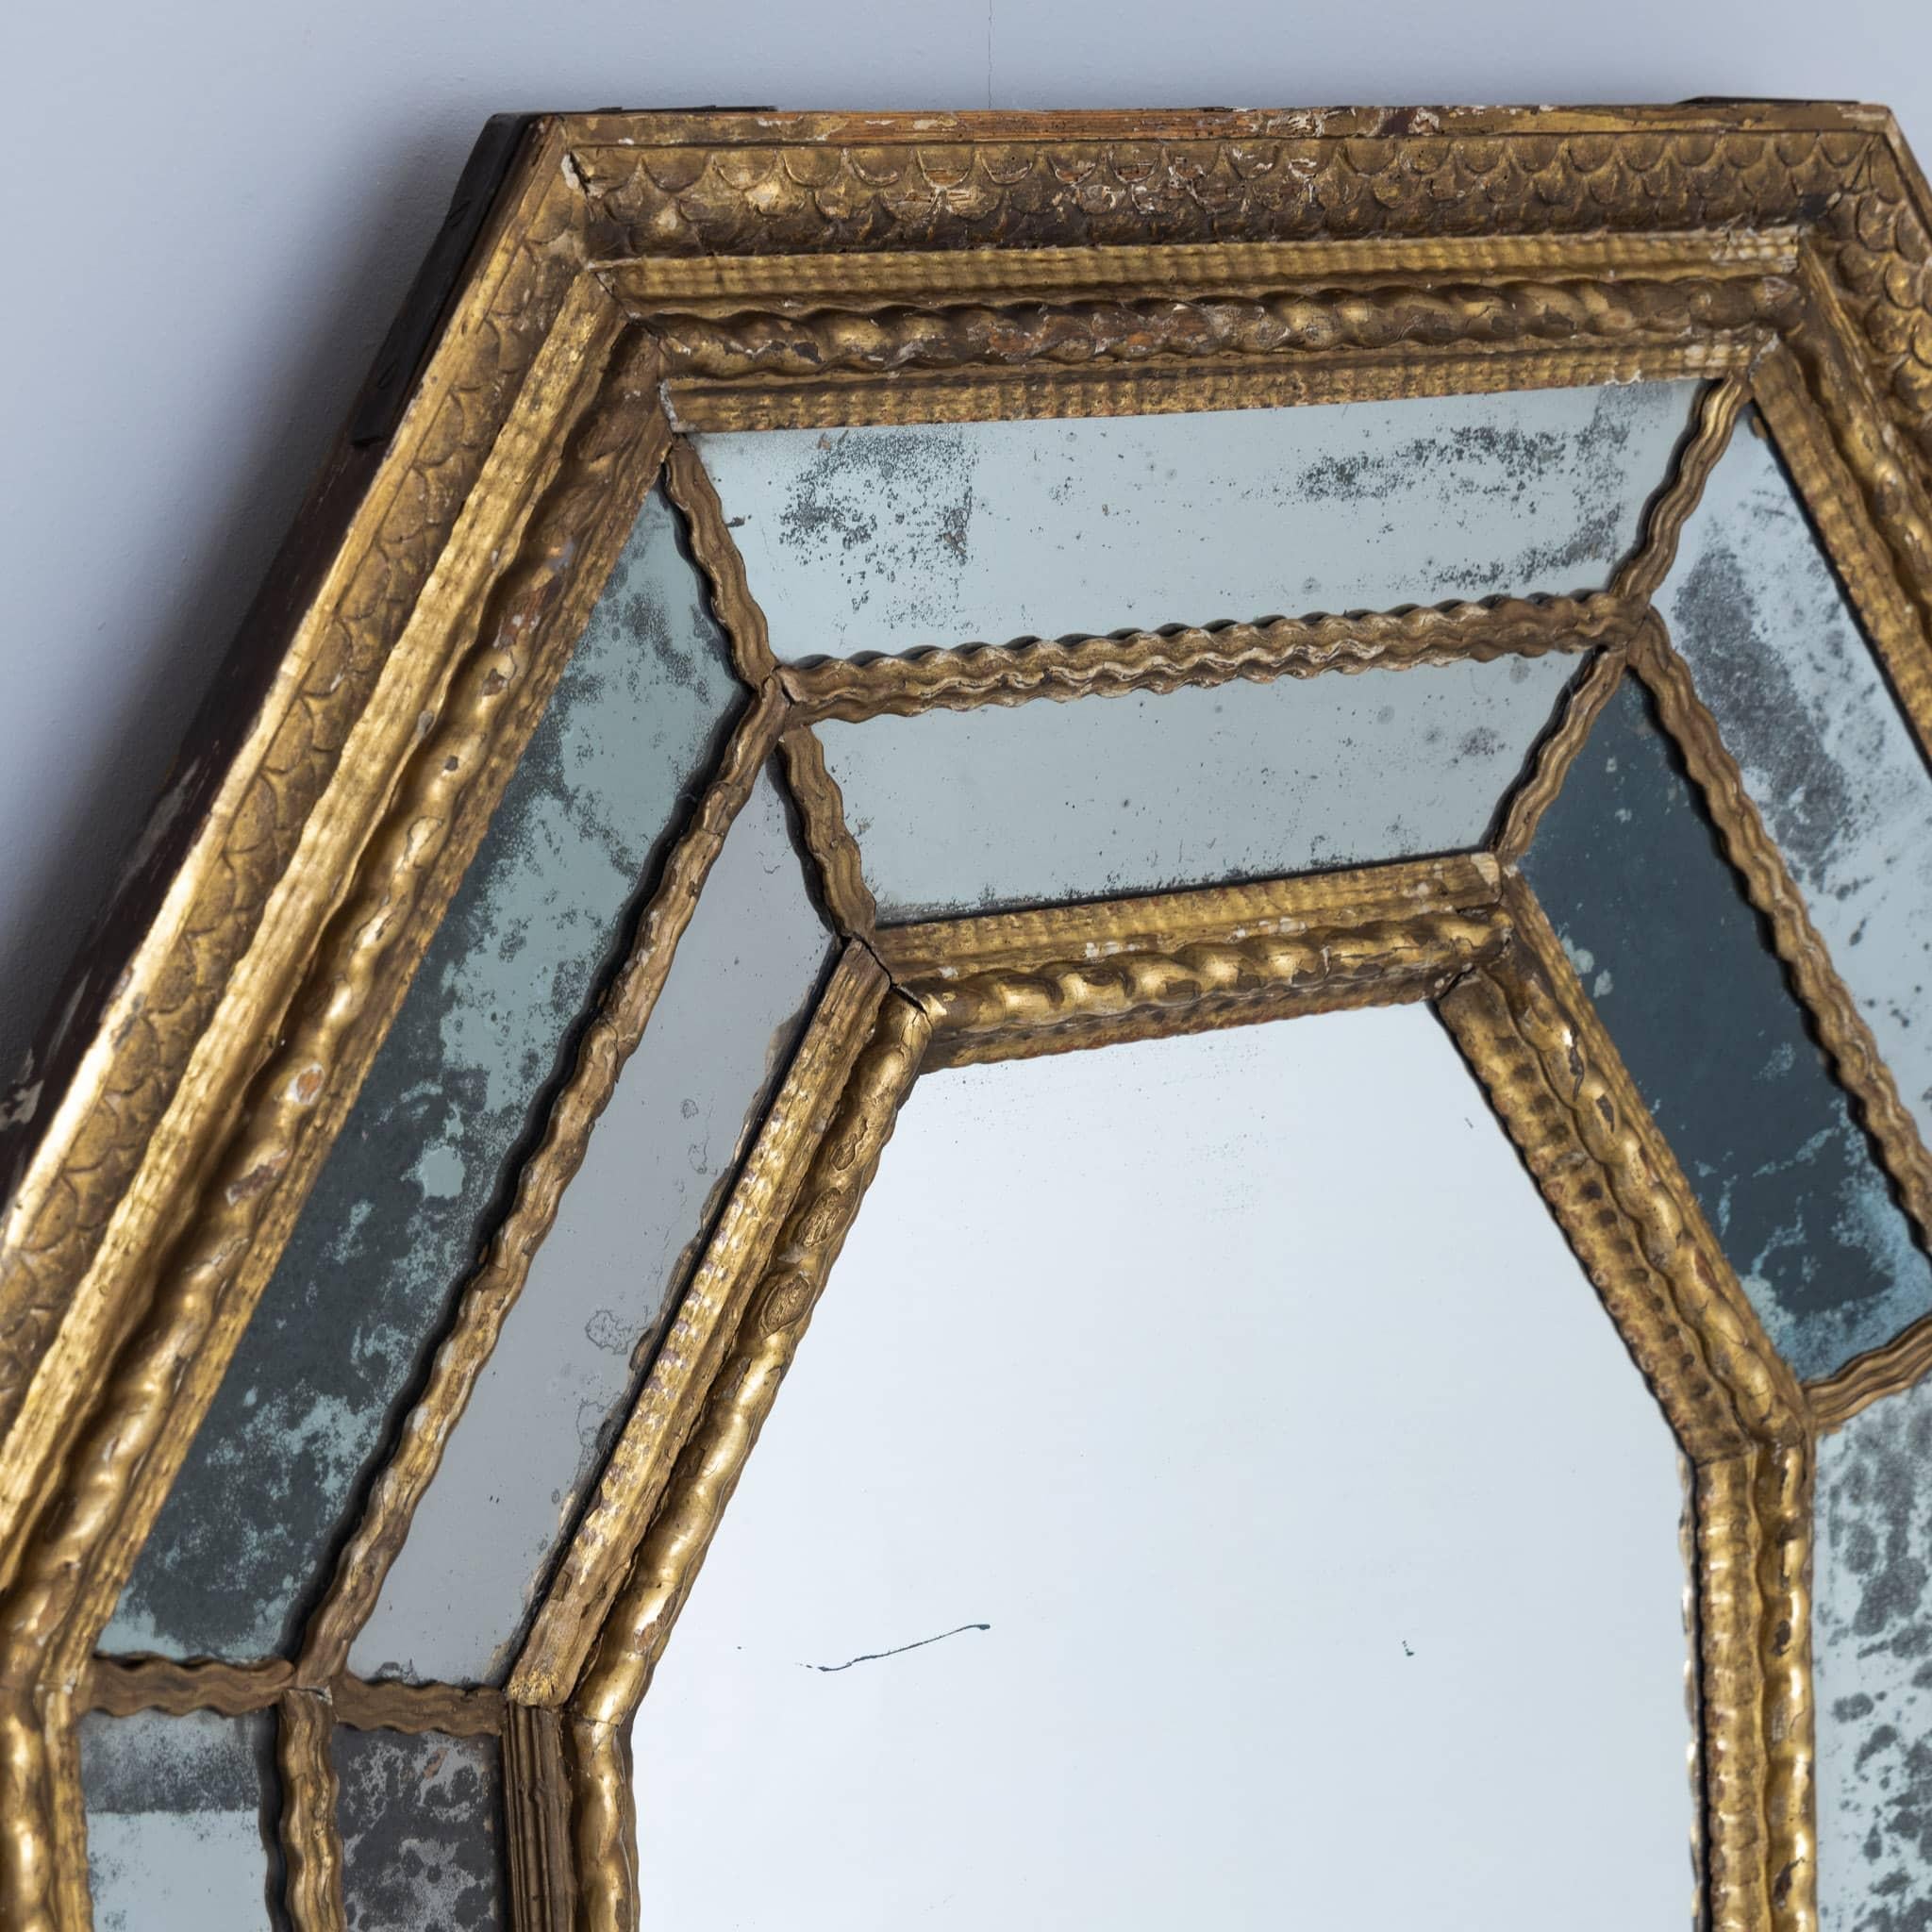 Spanish Octagonal Gilt and Facetted Wall Mirror, Spain, 17th century